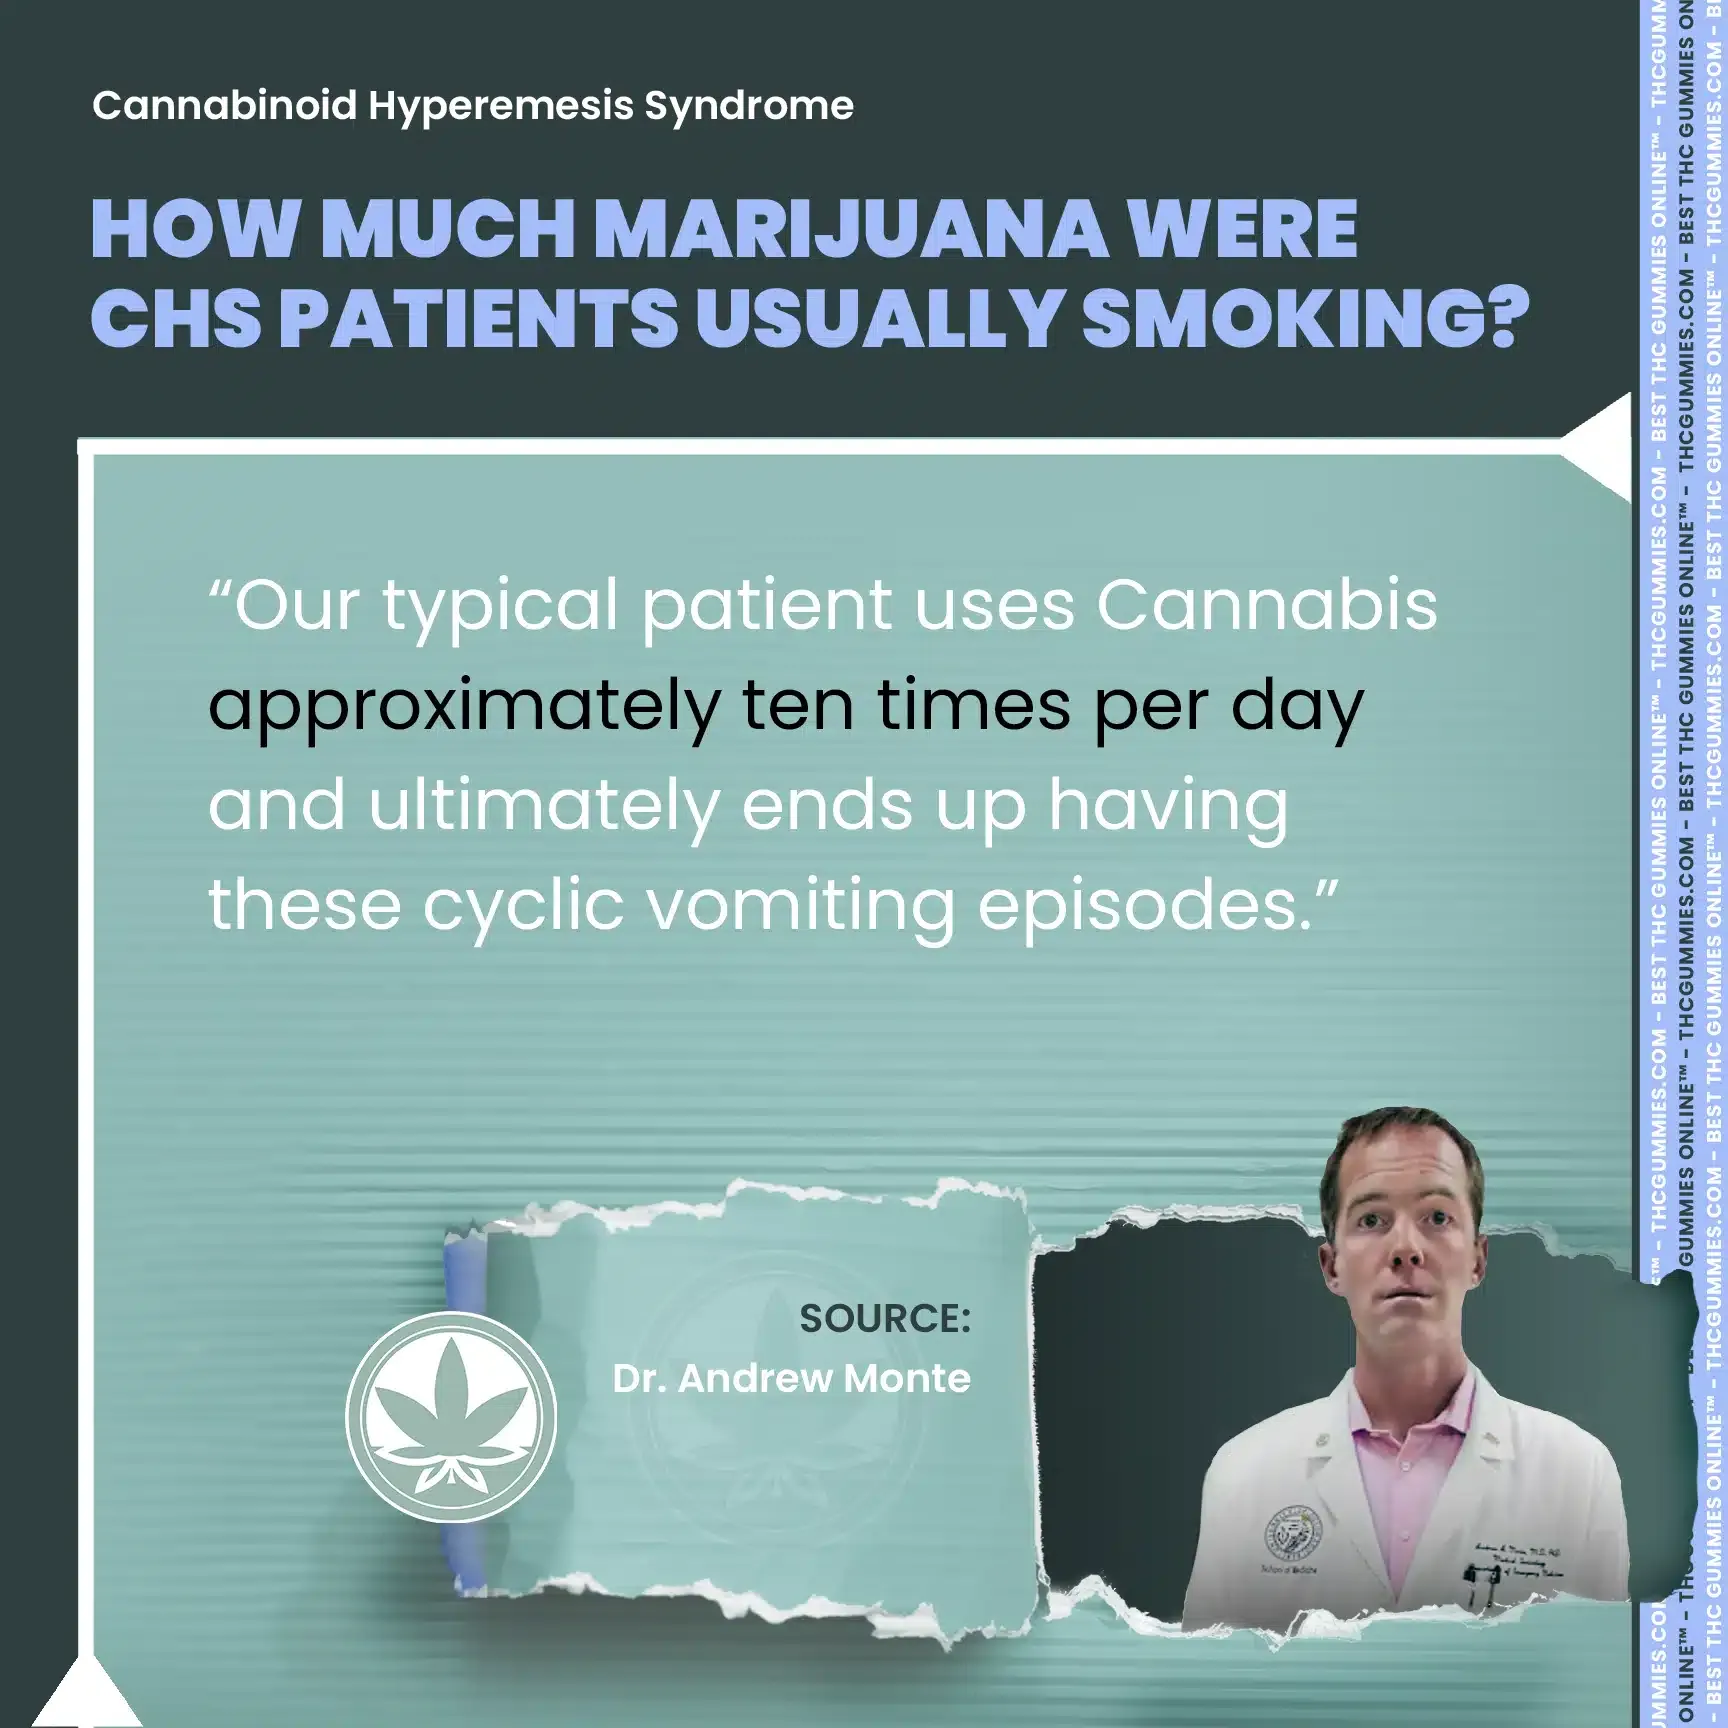 Dr andrew monte says chs patients smoke 10 times per day